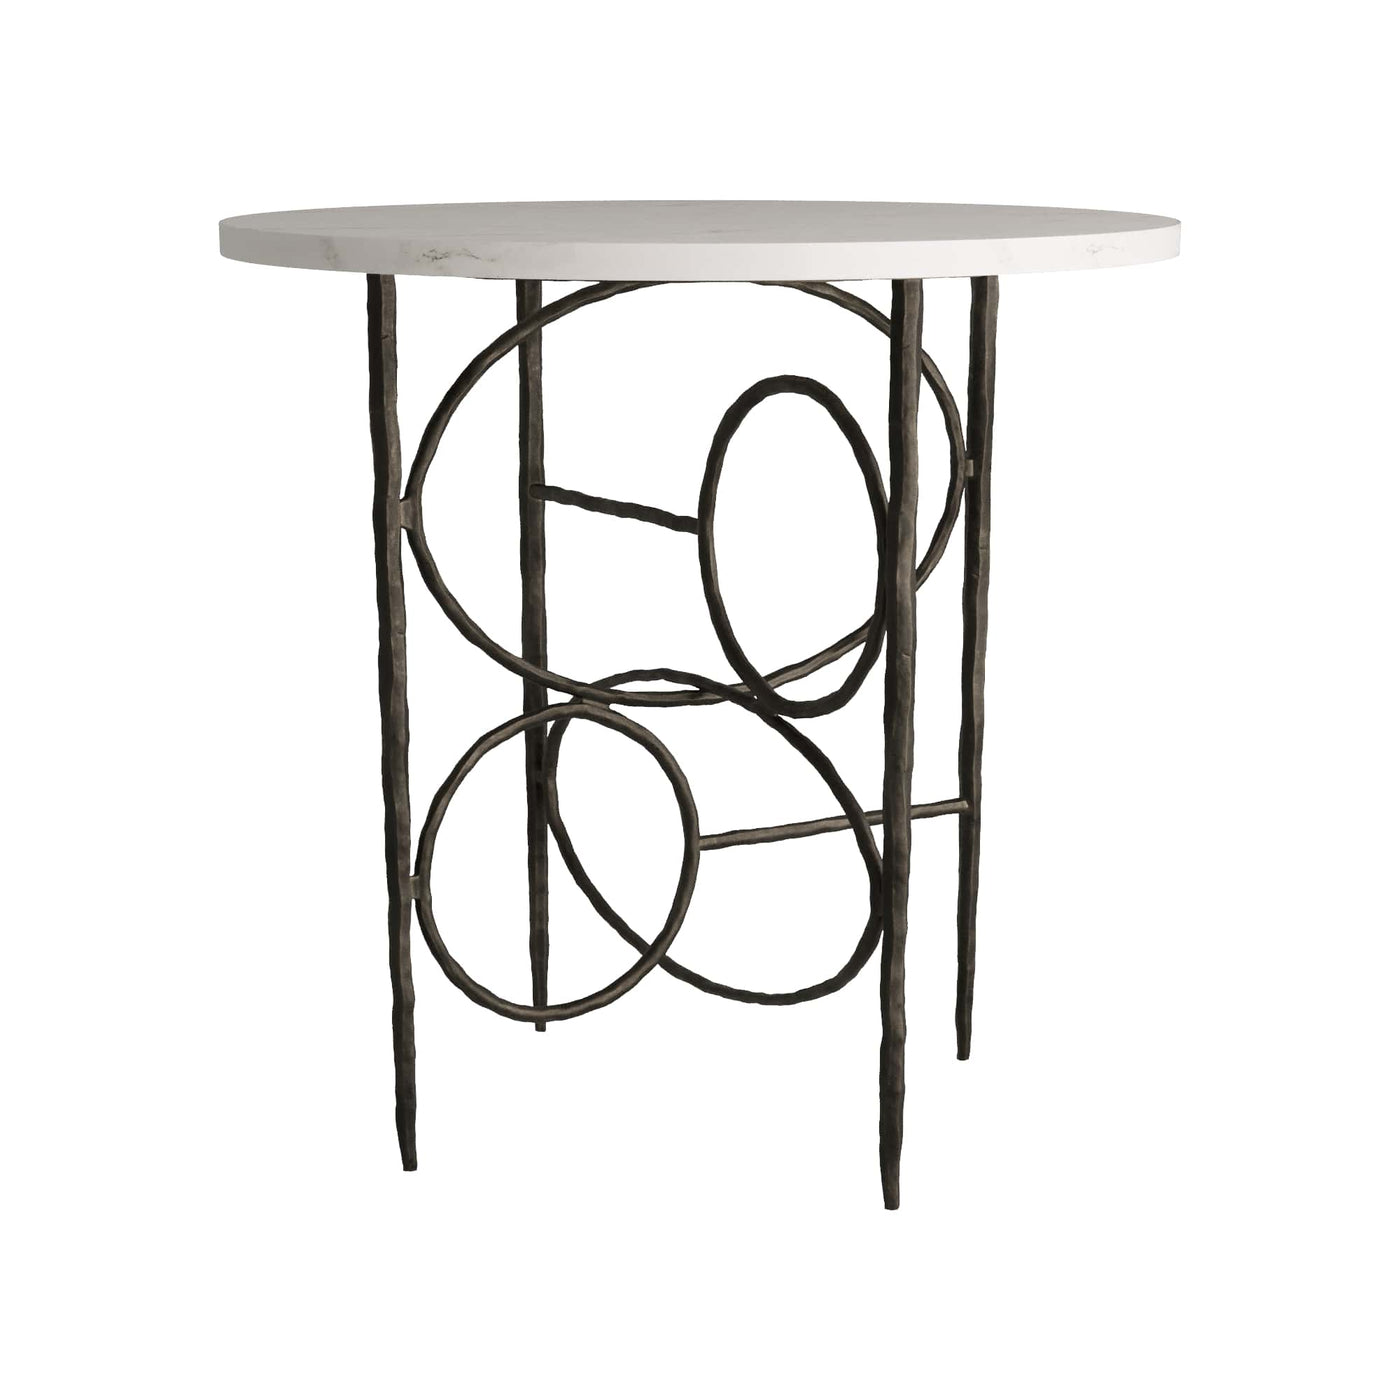 TABLE CHAIN LOOPS WITH BLACK IRON & MARBLE TOP